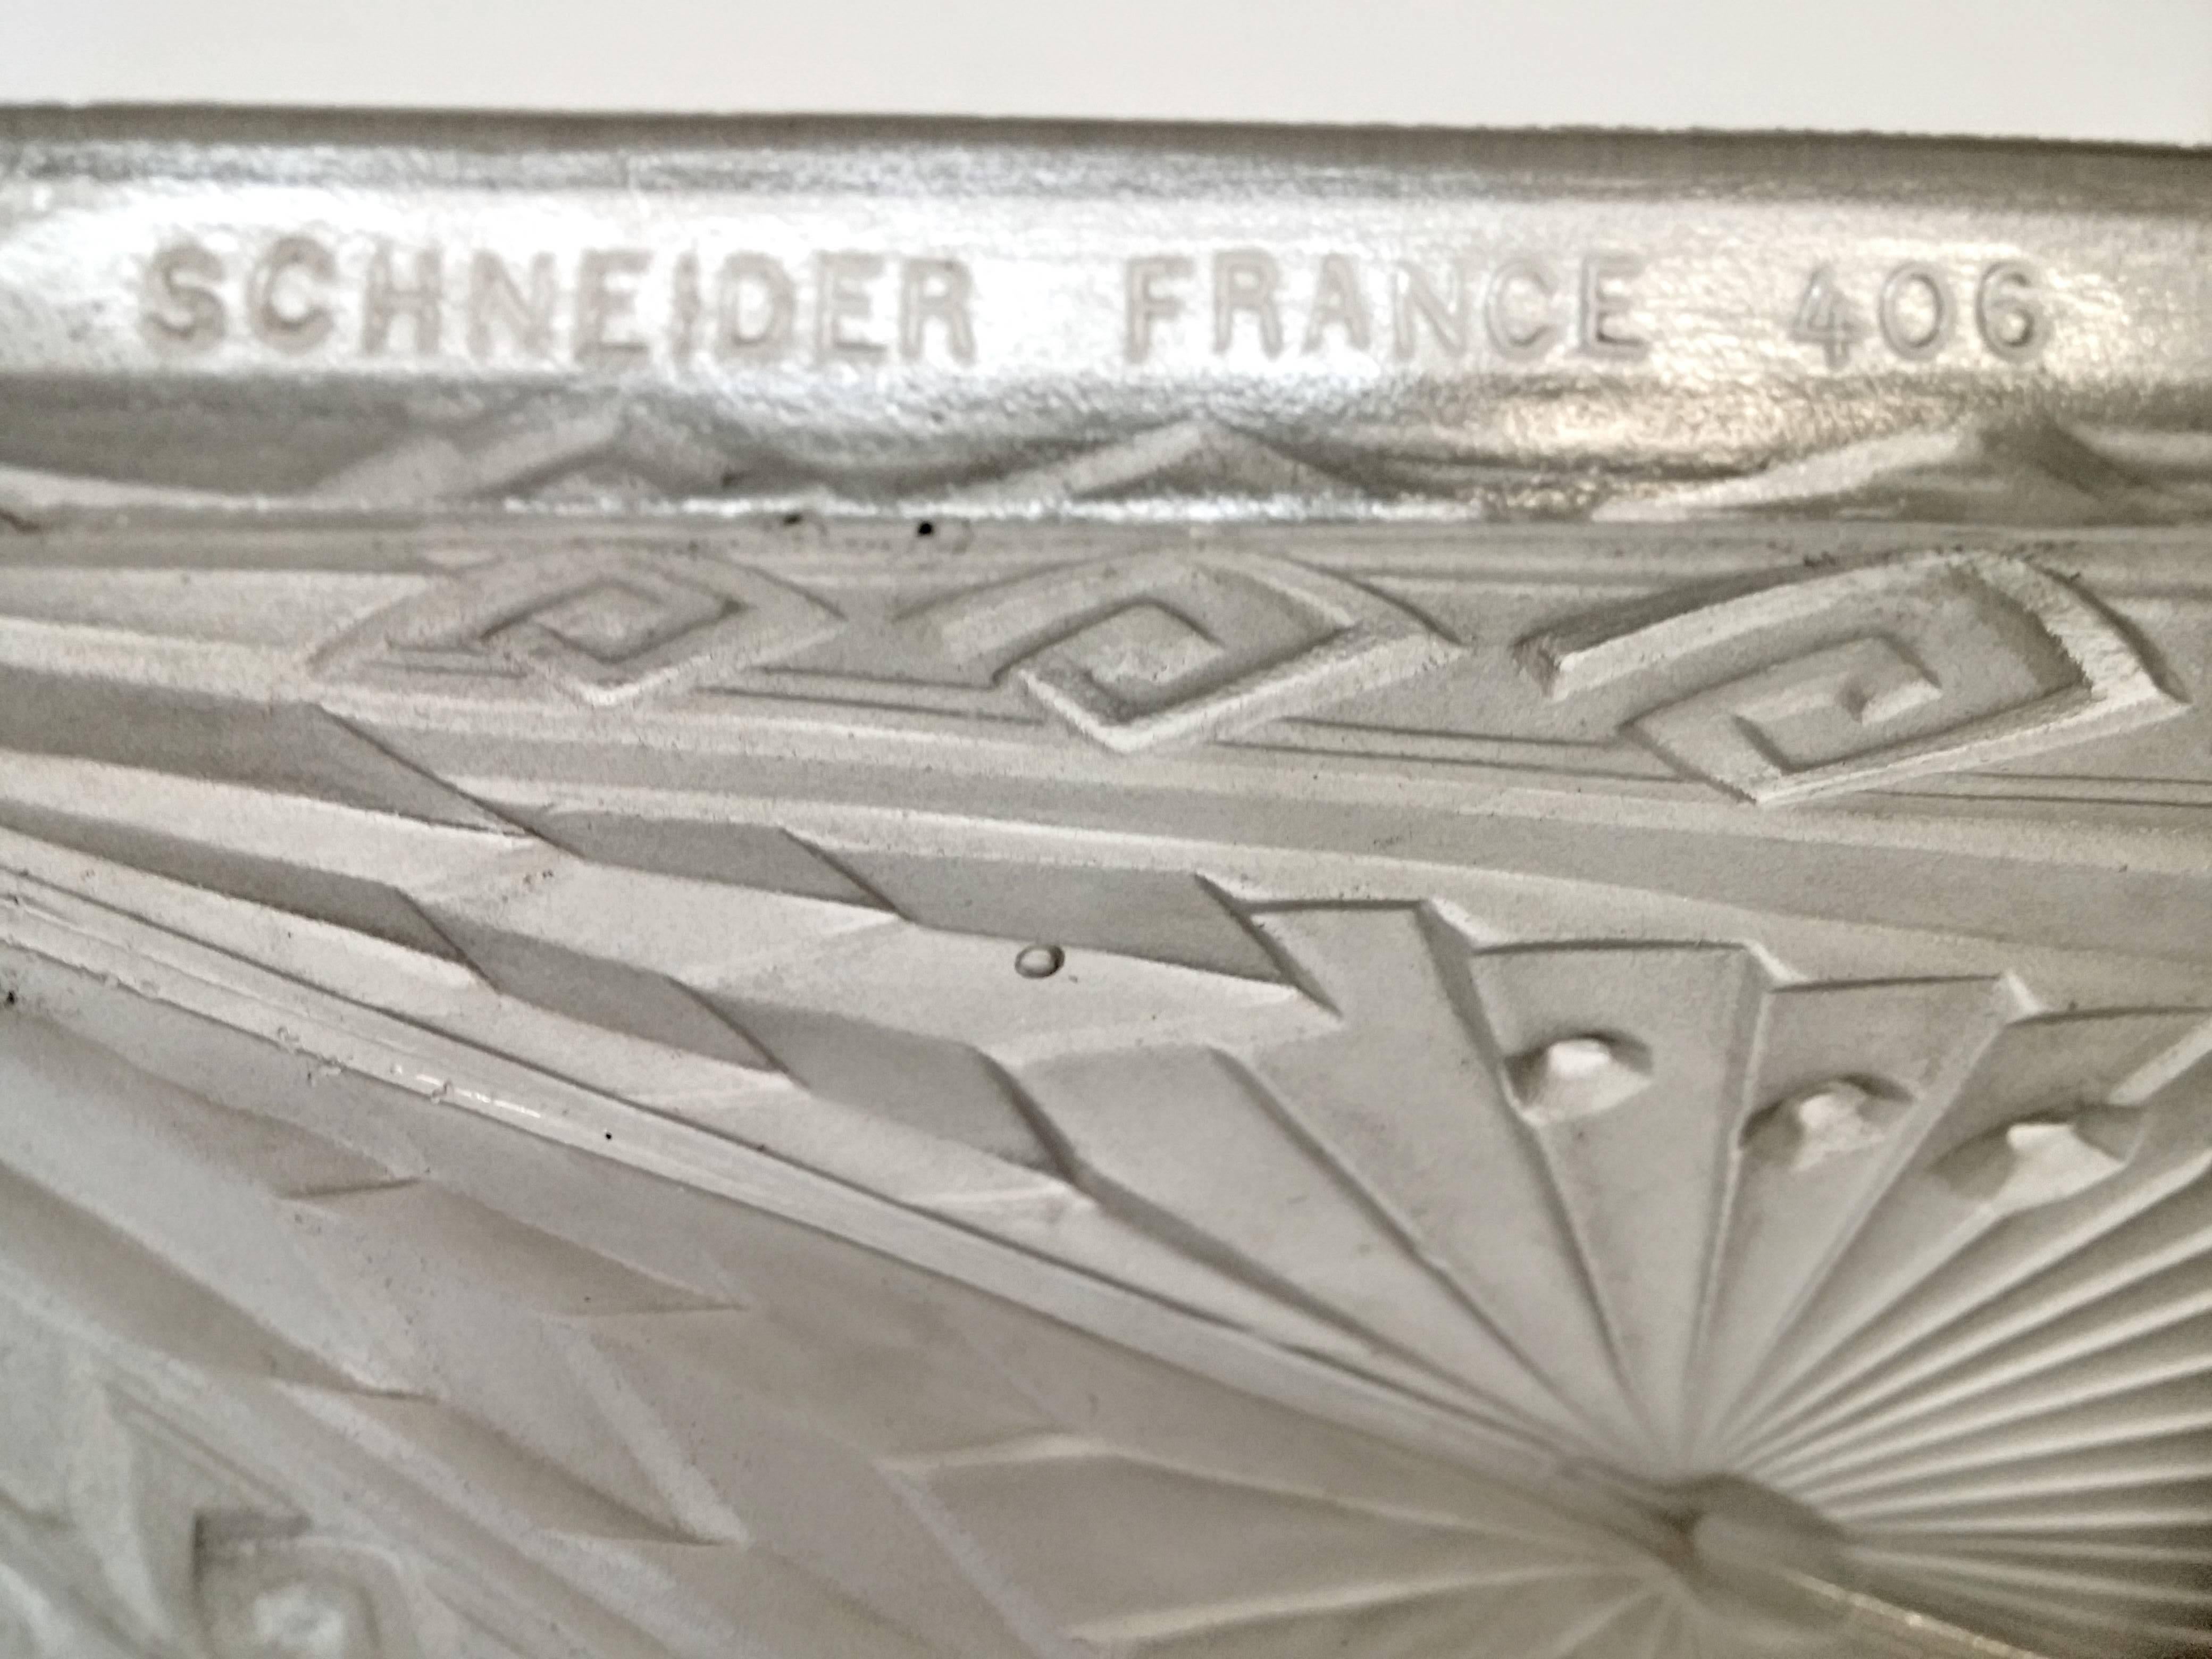 Pair of French Art Deco signed by Schneider (2 pairs available) For Sale 1